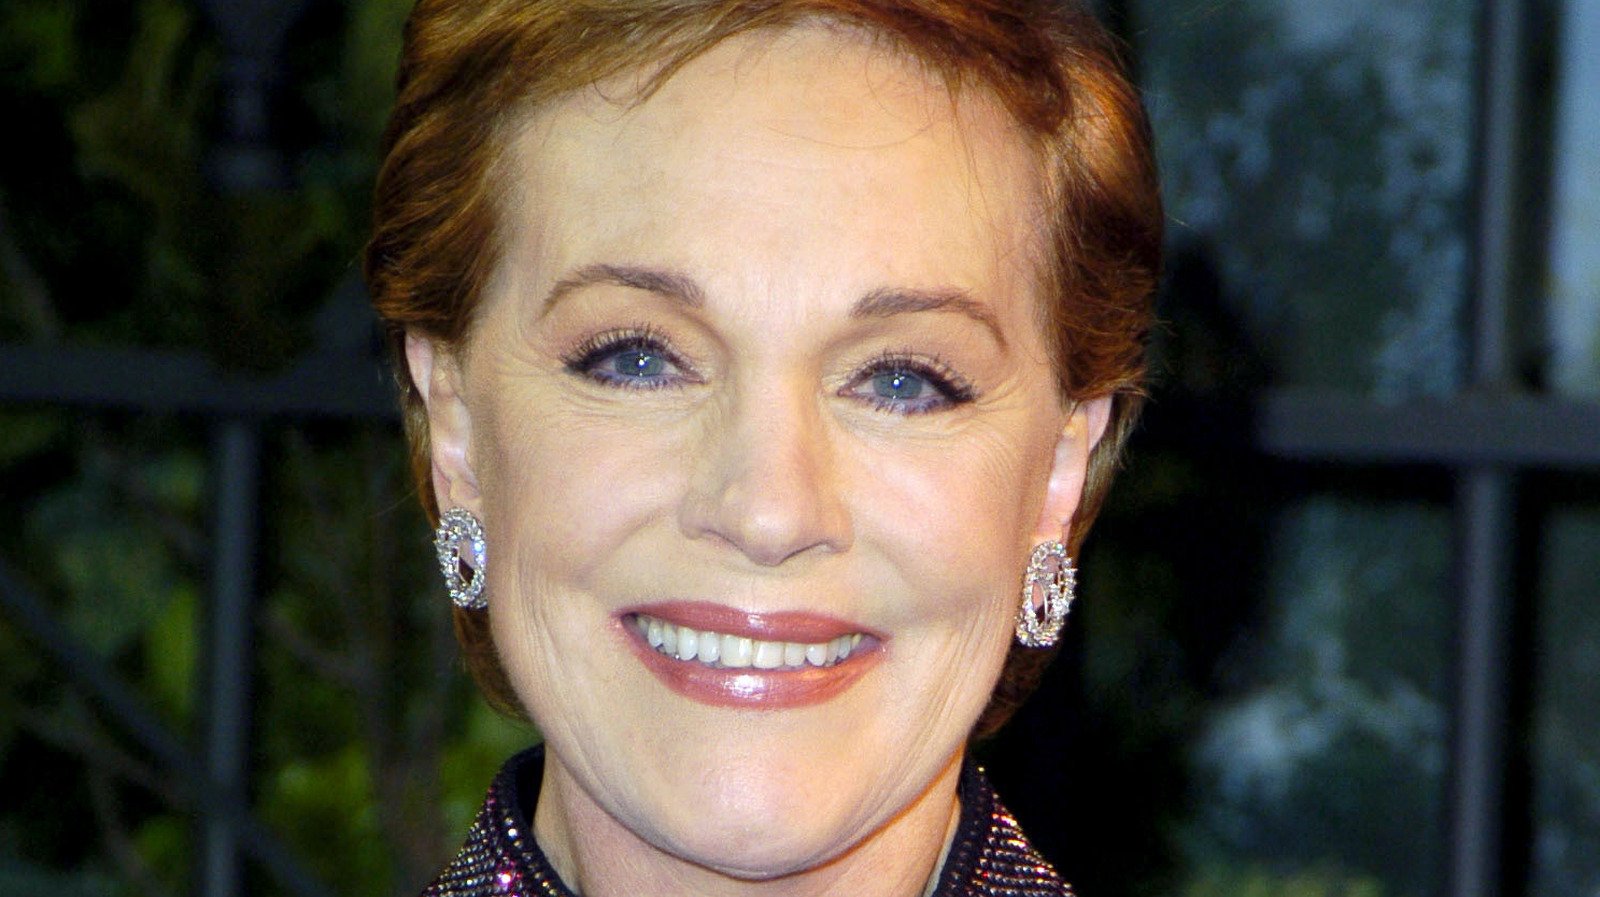 The One Mary Poppins Filming Moment That Made Julie Andrews Panic